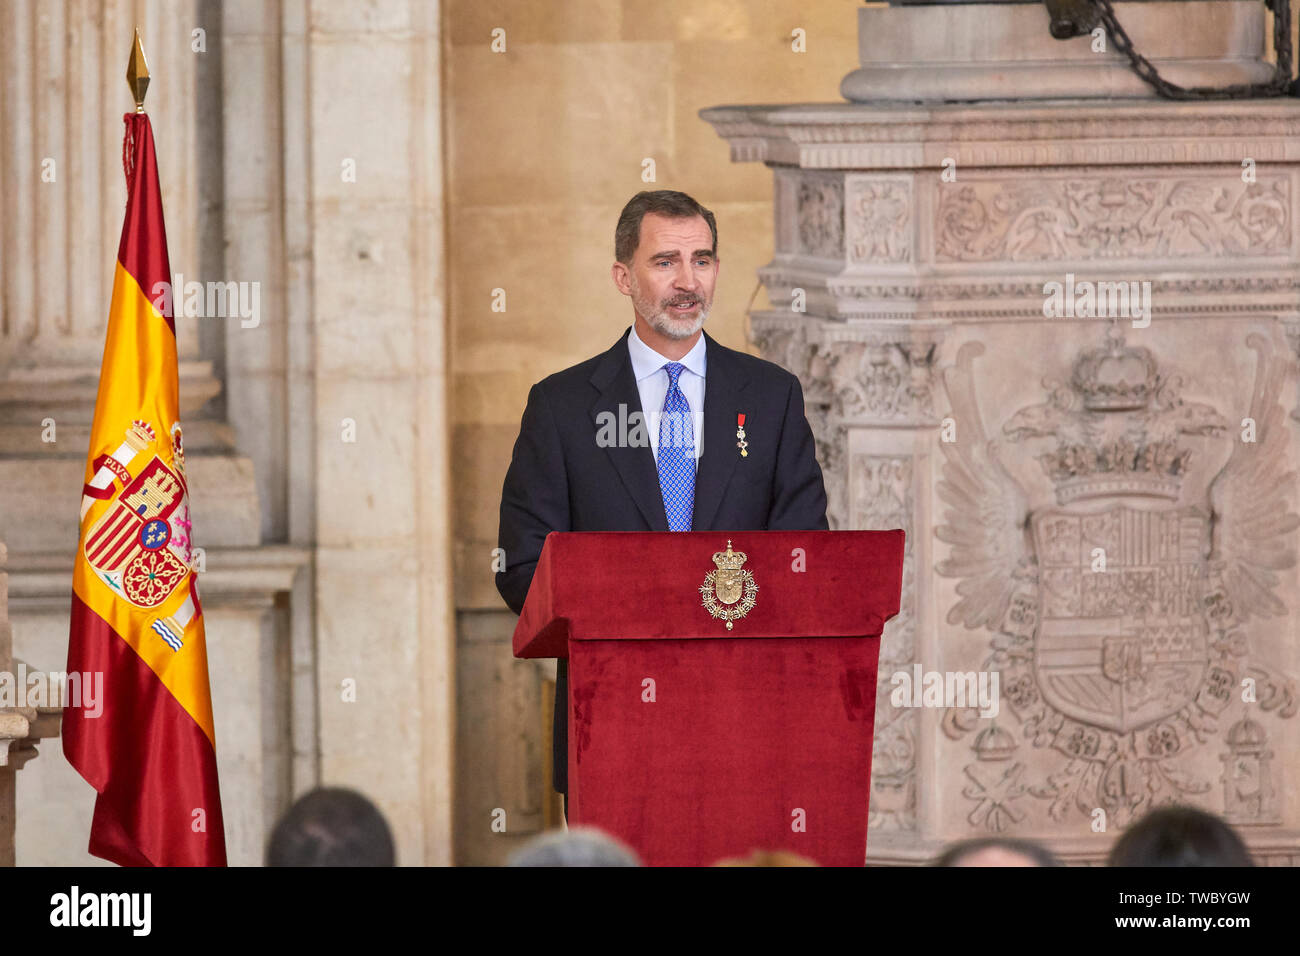 King Felipe VI of Spain speaks during the Imposition of decorations of the Civil Merit Order at the Royal Palace in Madrid. Stock Photo